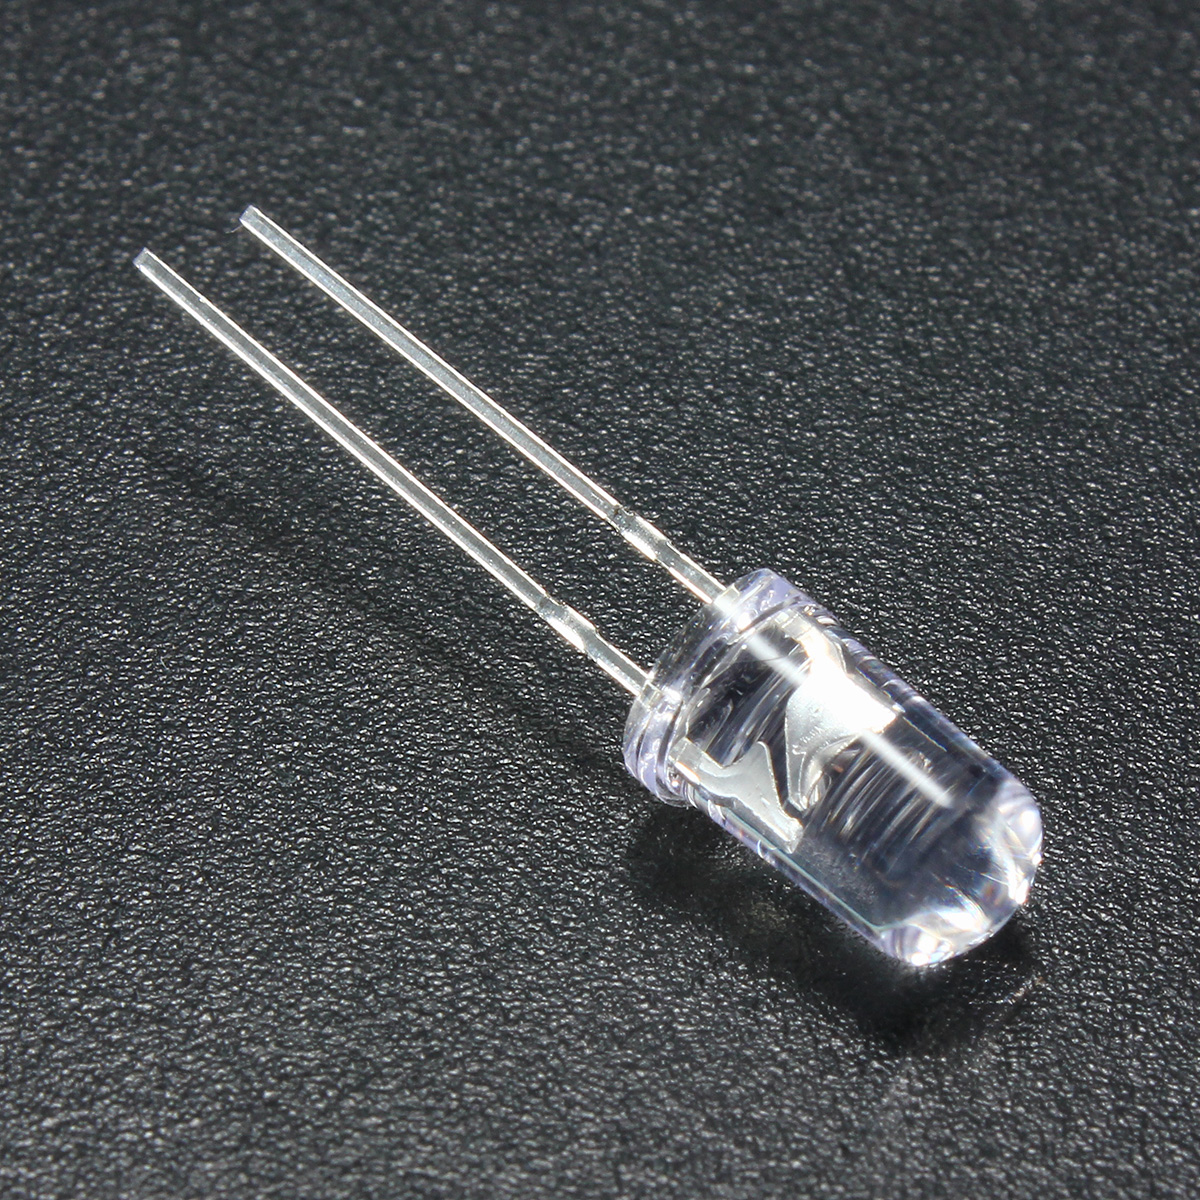 10pcs-5mm-5-Color-Water-Clear-Round-LED-Diodes-Assortment-DIY-Light-1076694